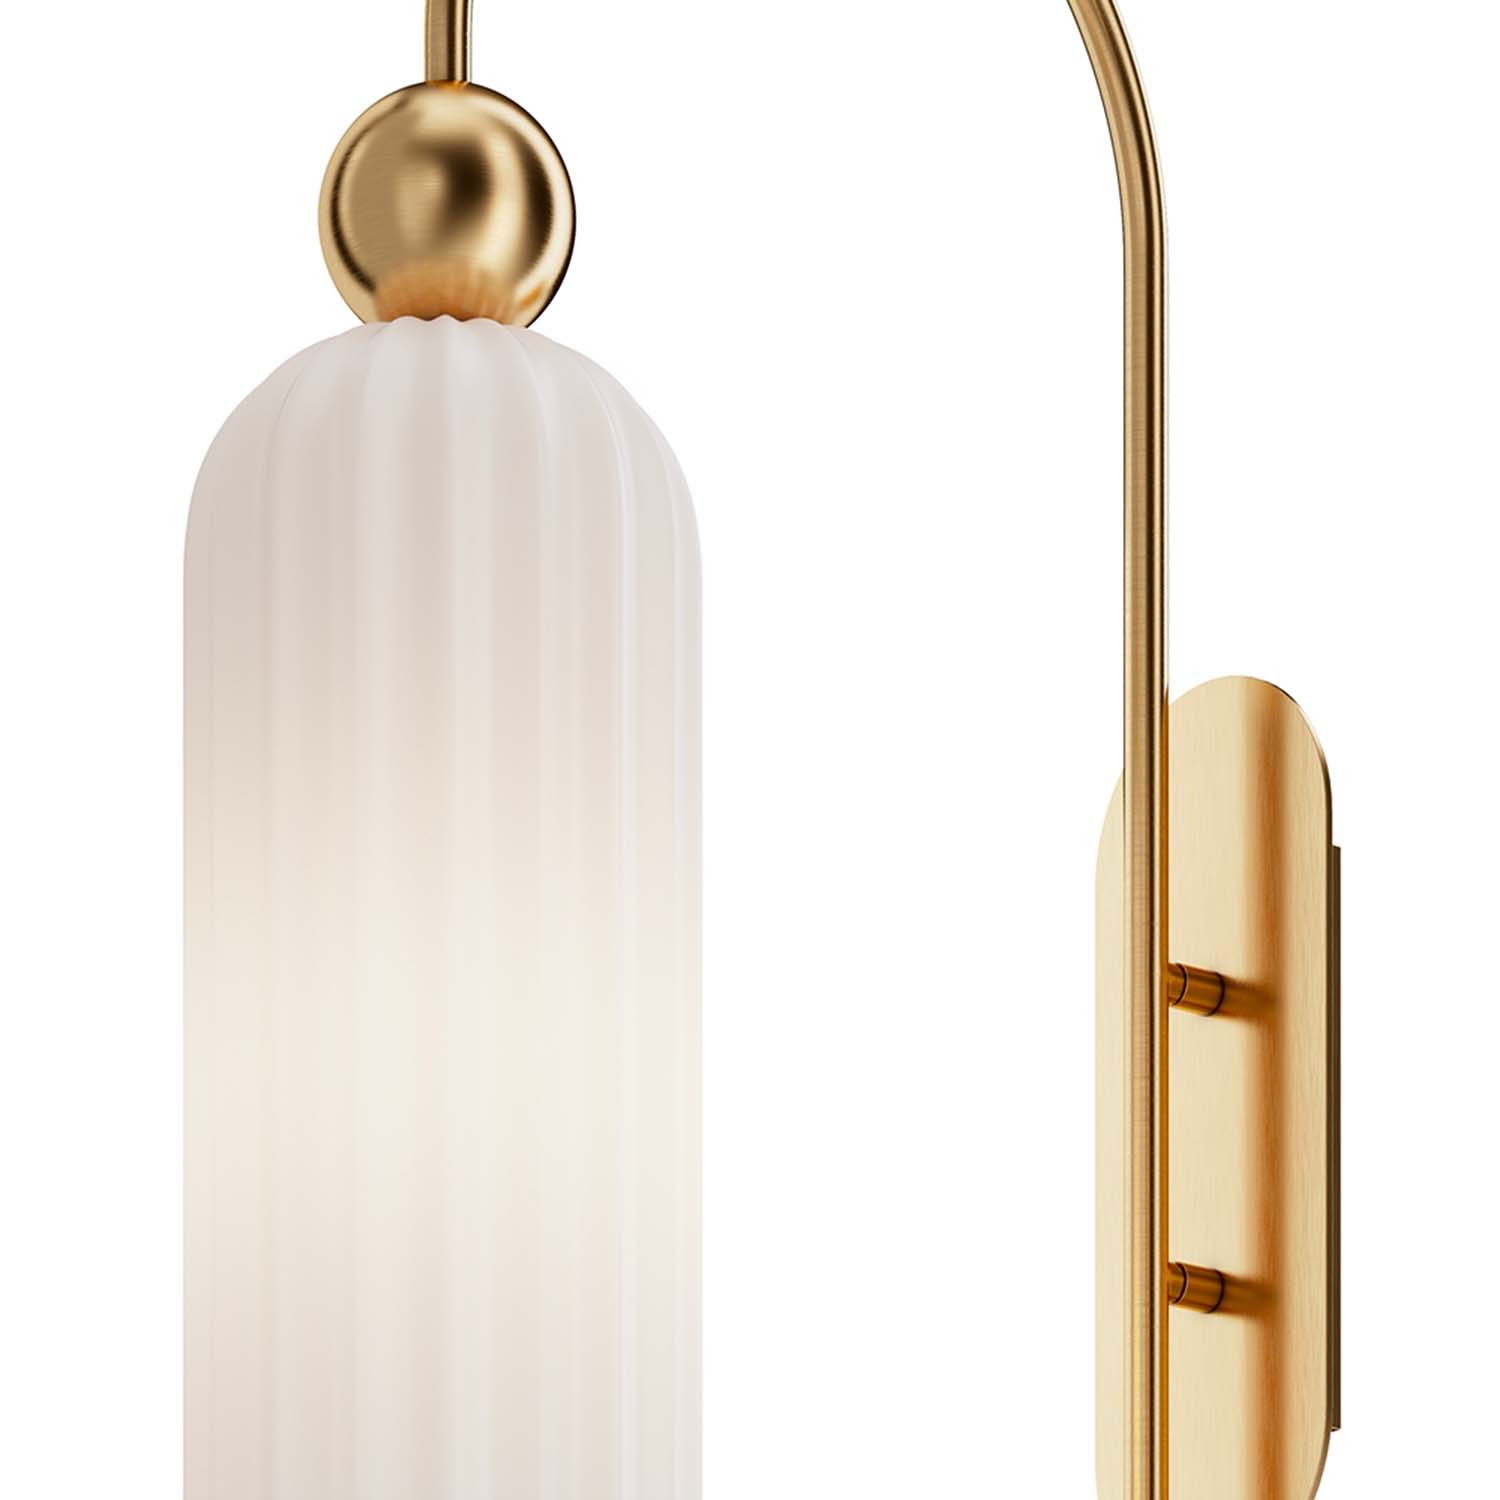 ANTIC A - Chic glass and brass wall light